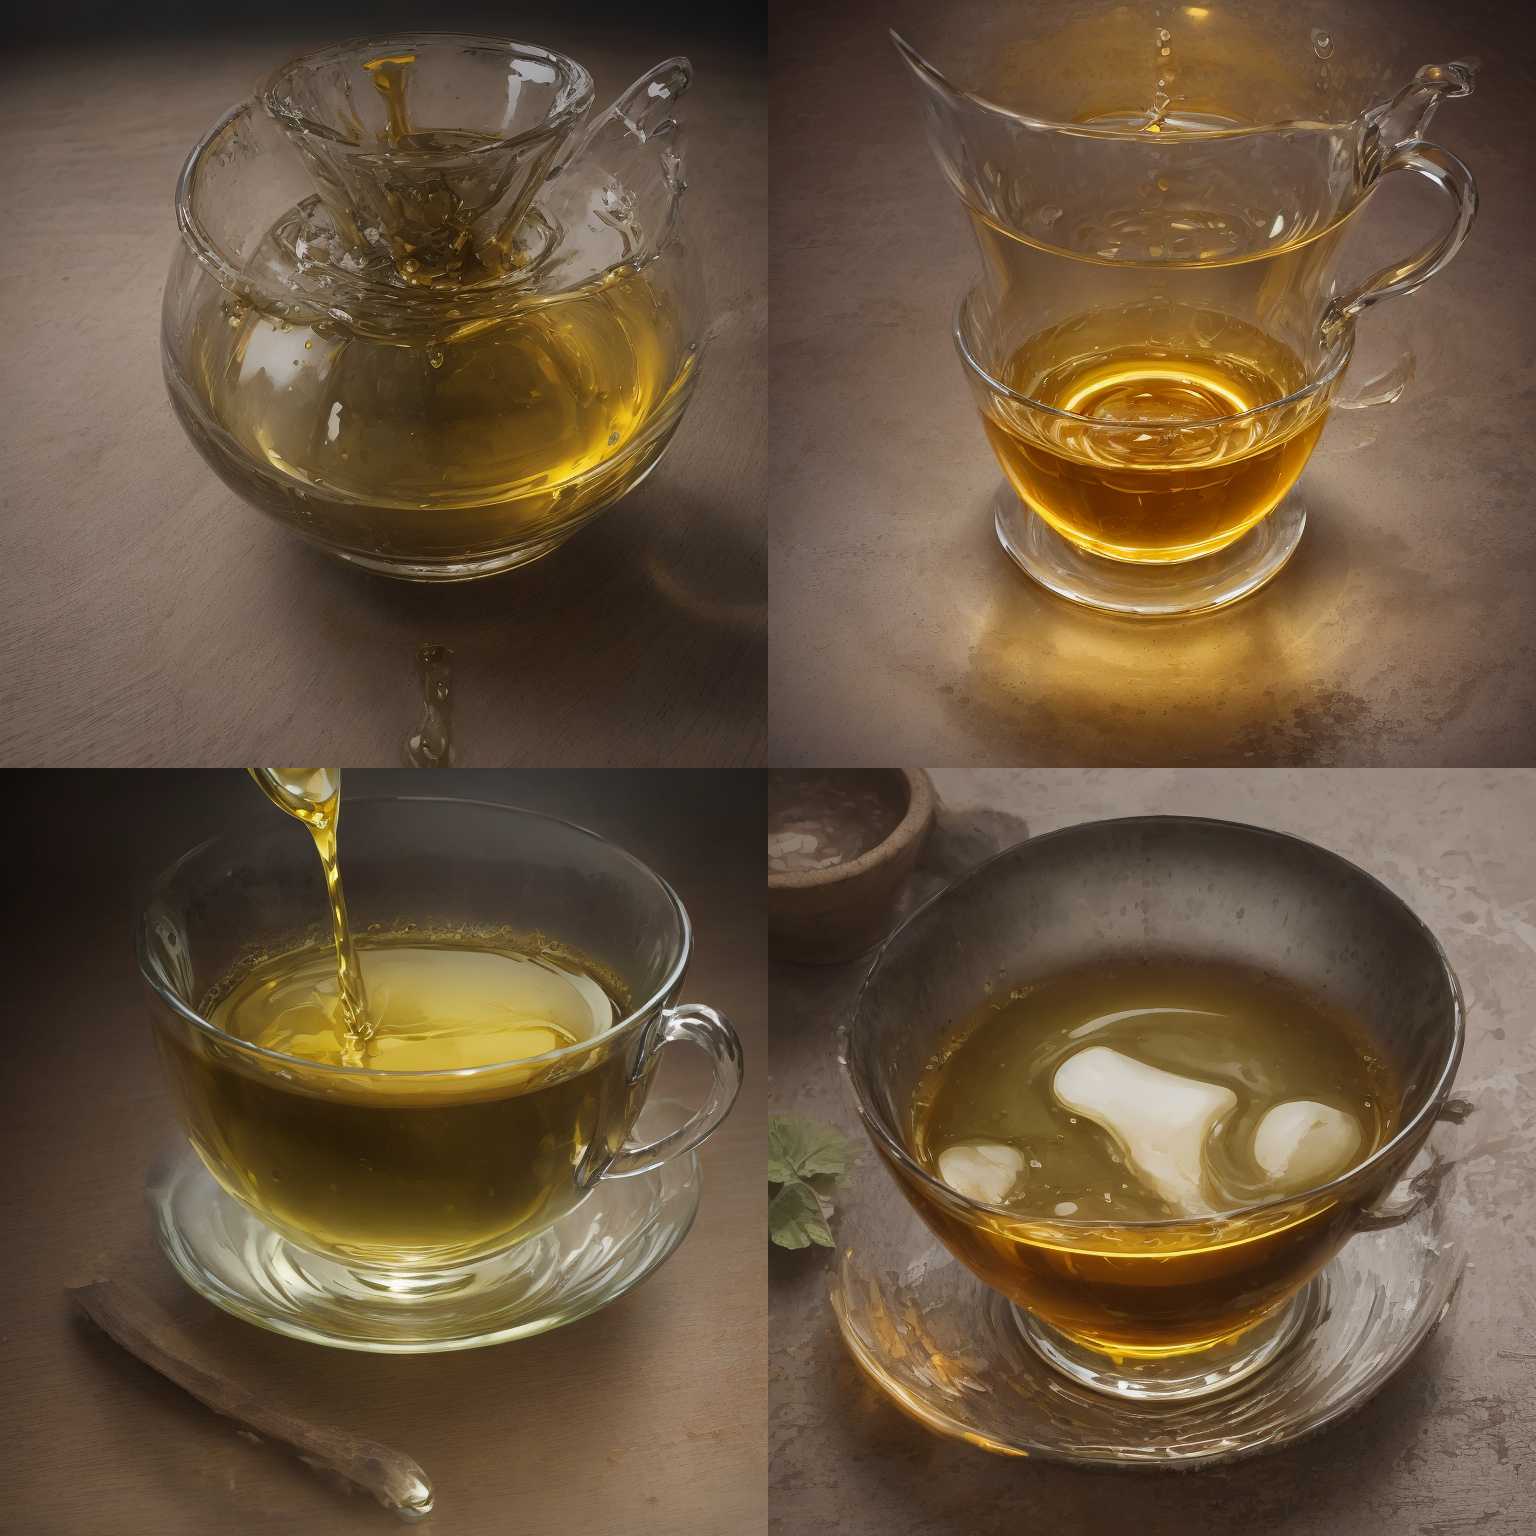 A cup of oil mixed with water